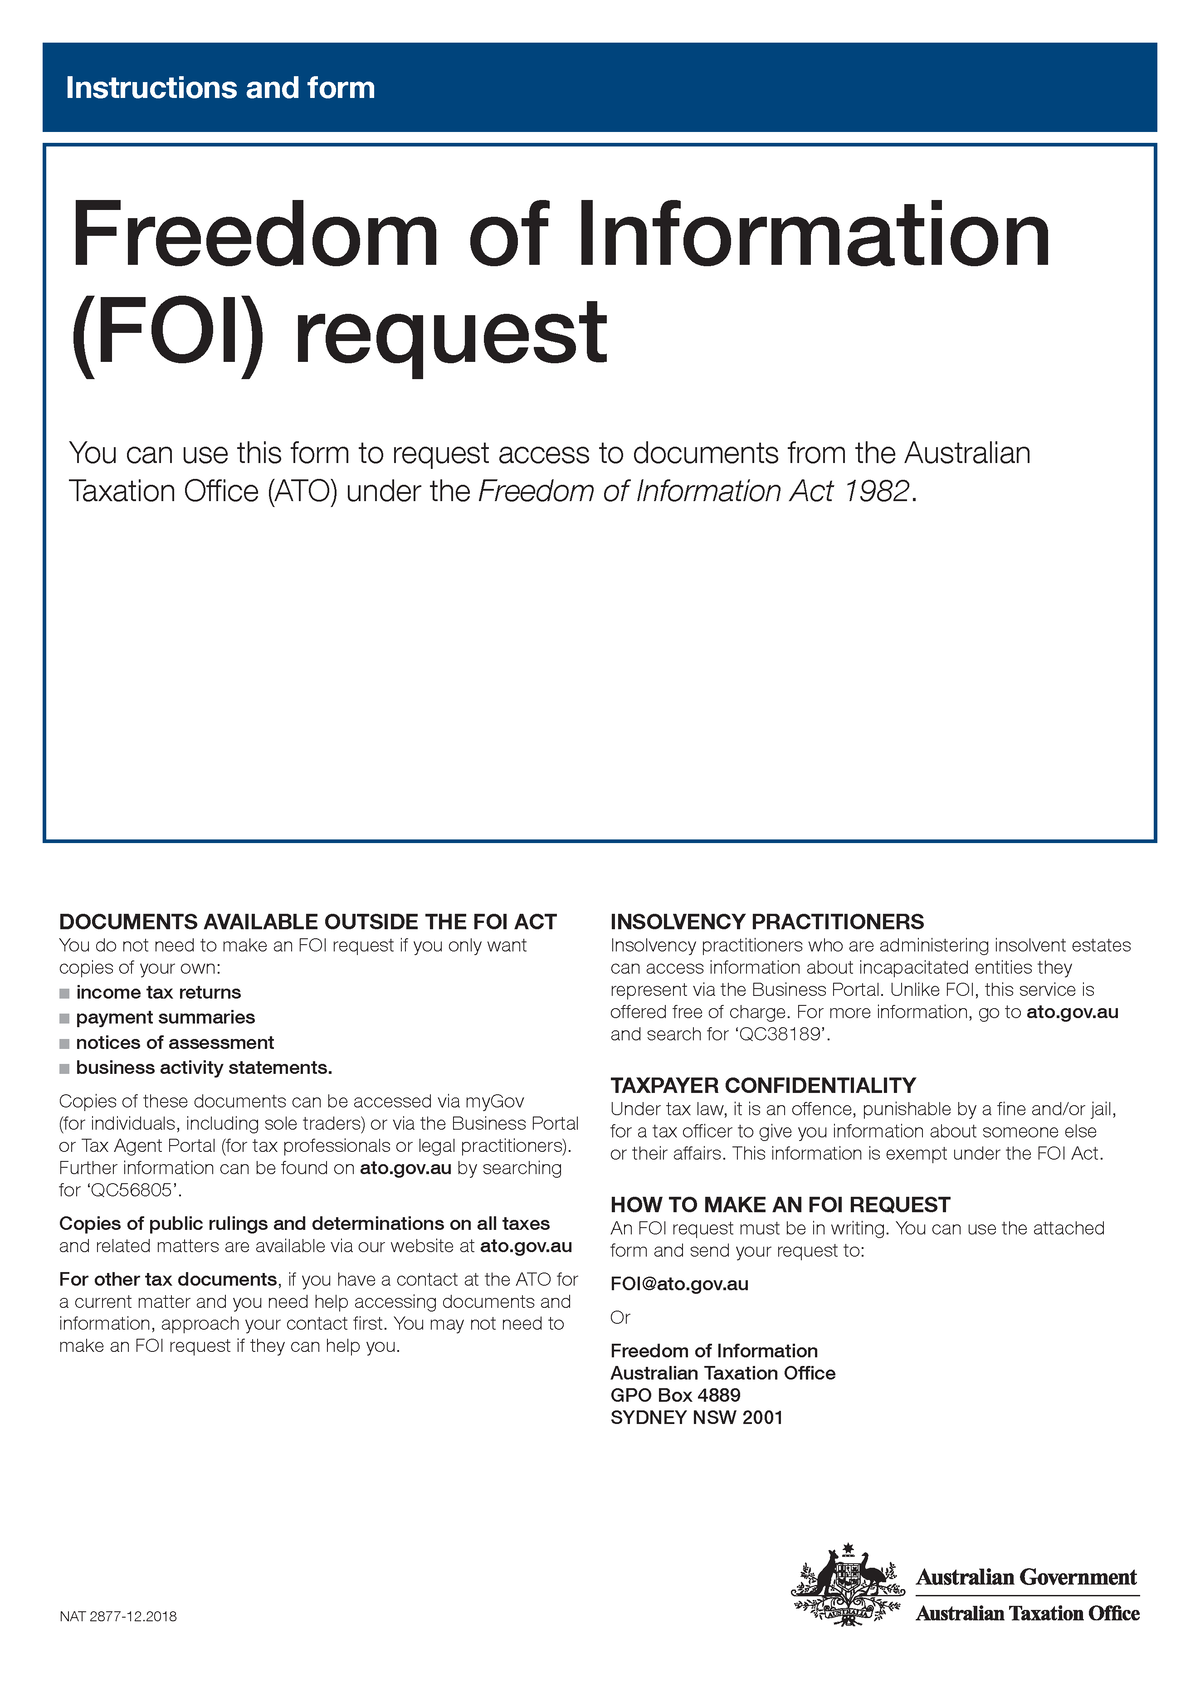 84862 e08 d0f8 4936 a21a c548a8780079 - DOCUMENTS AVAILABLE OUTSIDE THE FOI  ACT You do not need to - Studocu